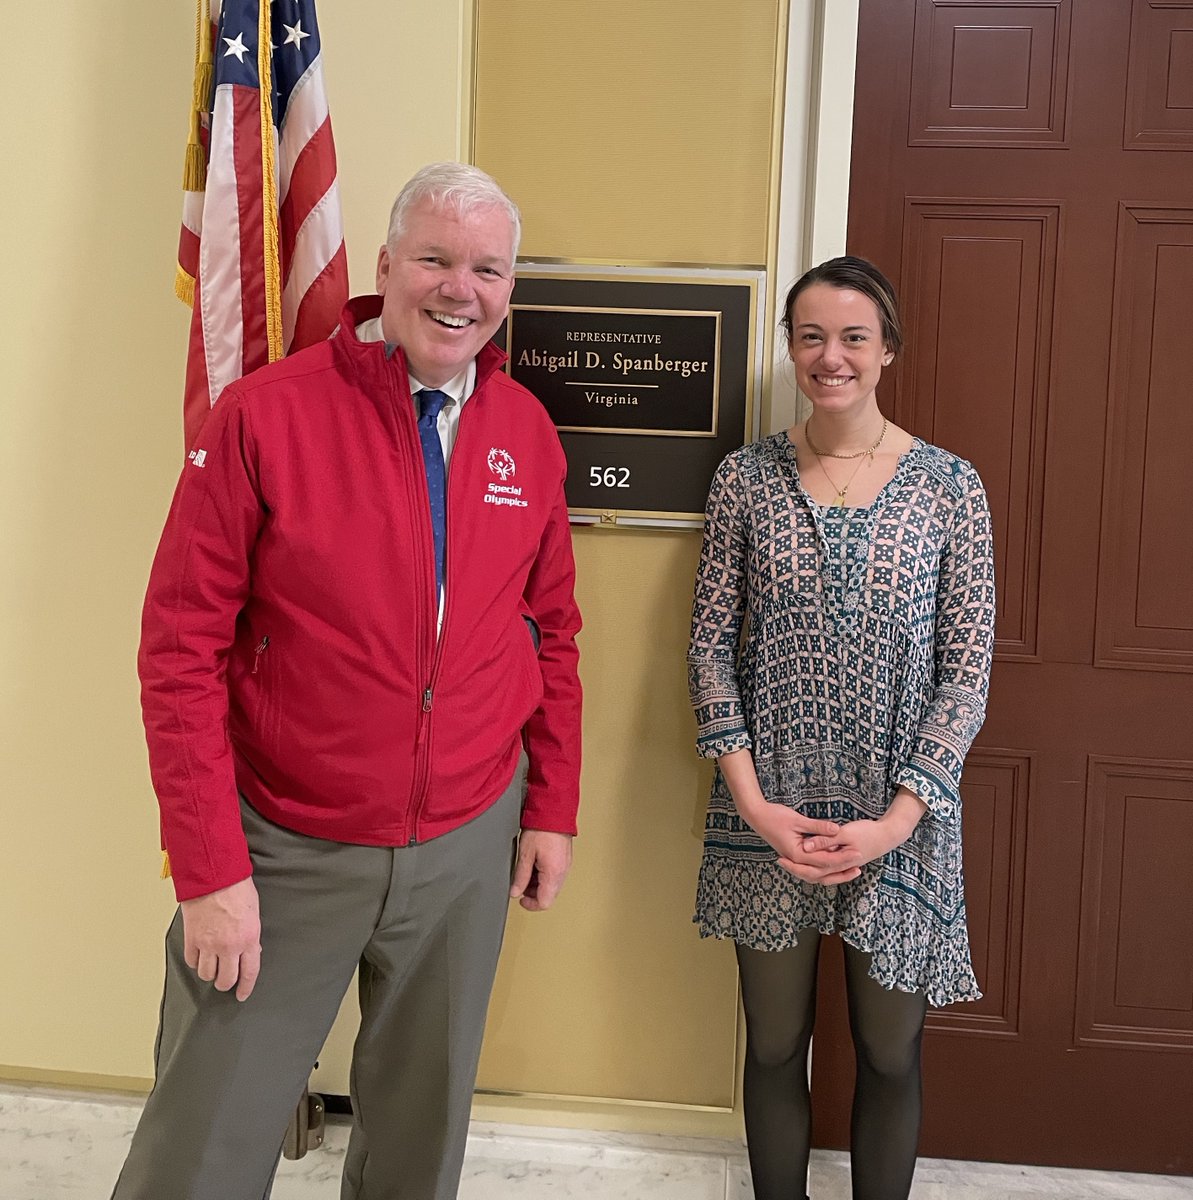 Our President @d_thomason just wrapped up a great meeting with @RepSpanberger's office. We hope you enjoyed hearing about our life-changing work in education and health! #SOHillDay